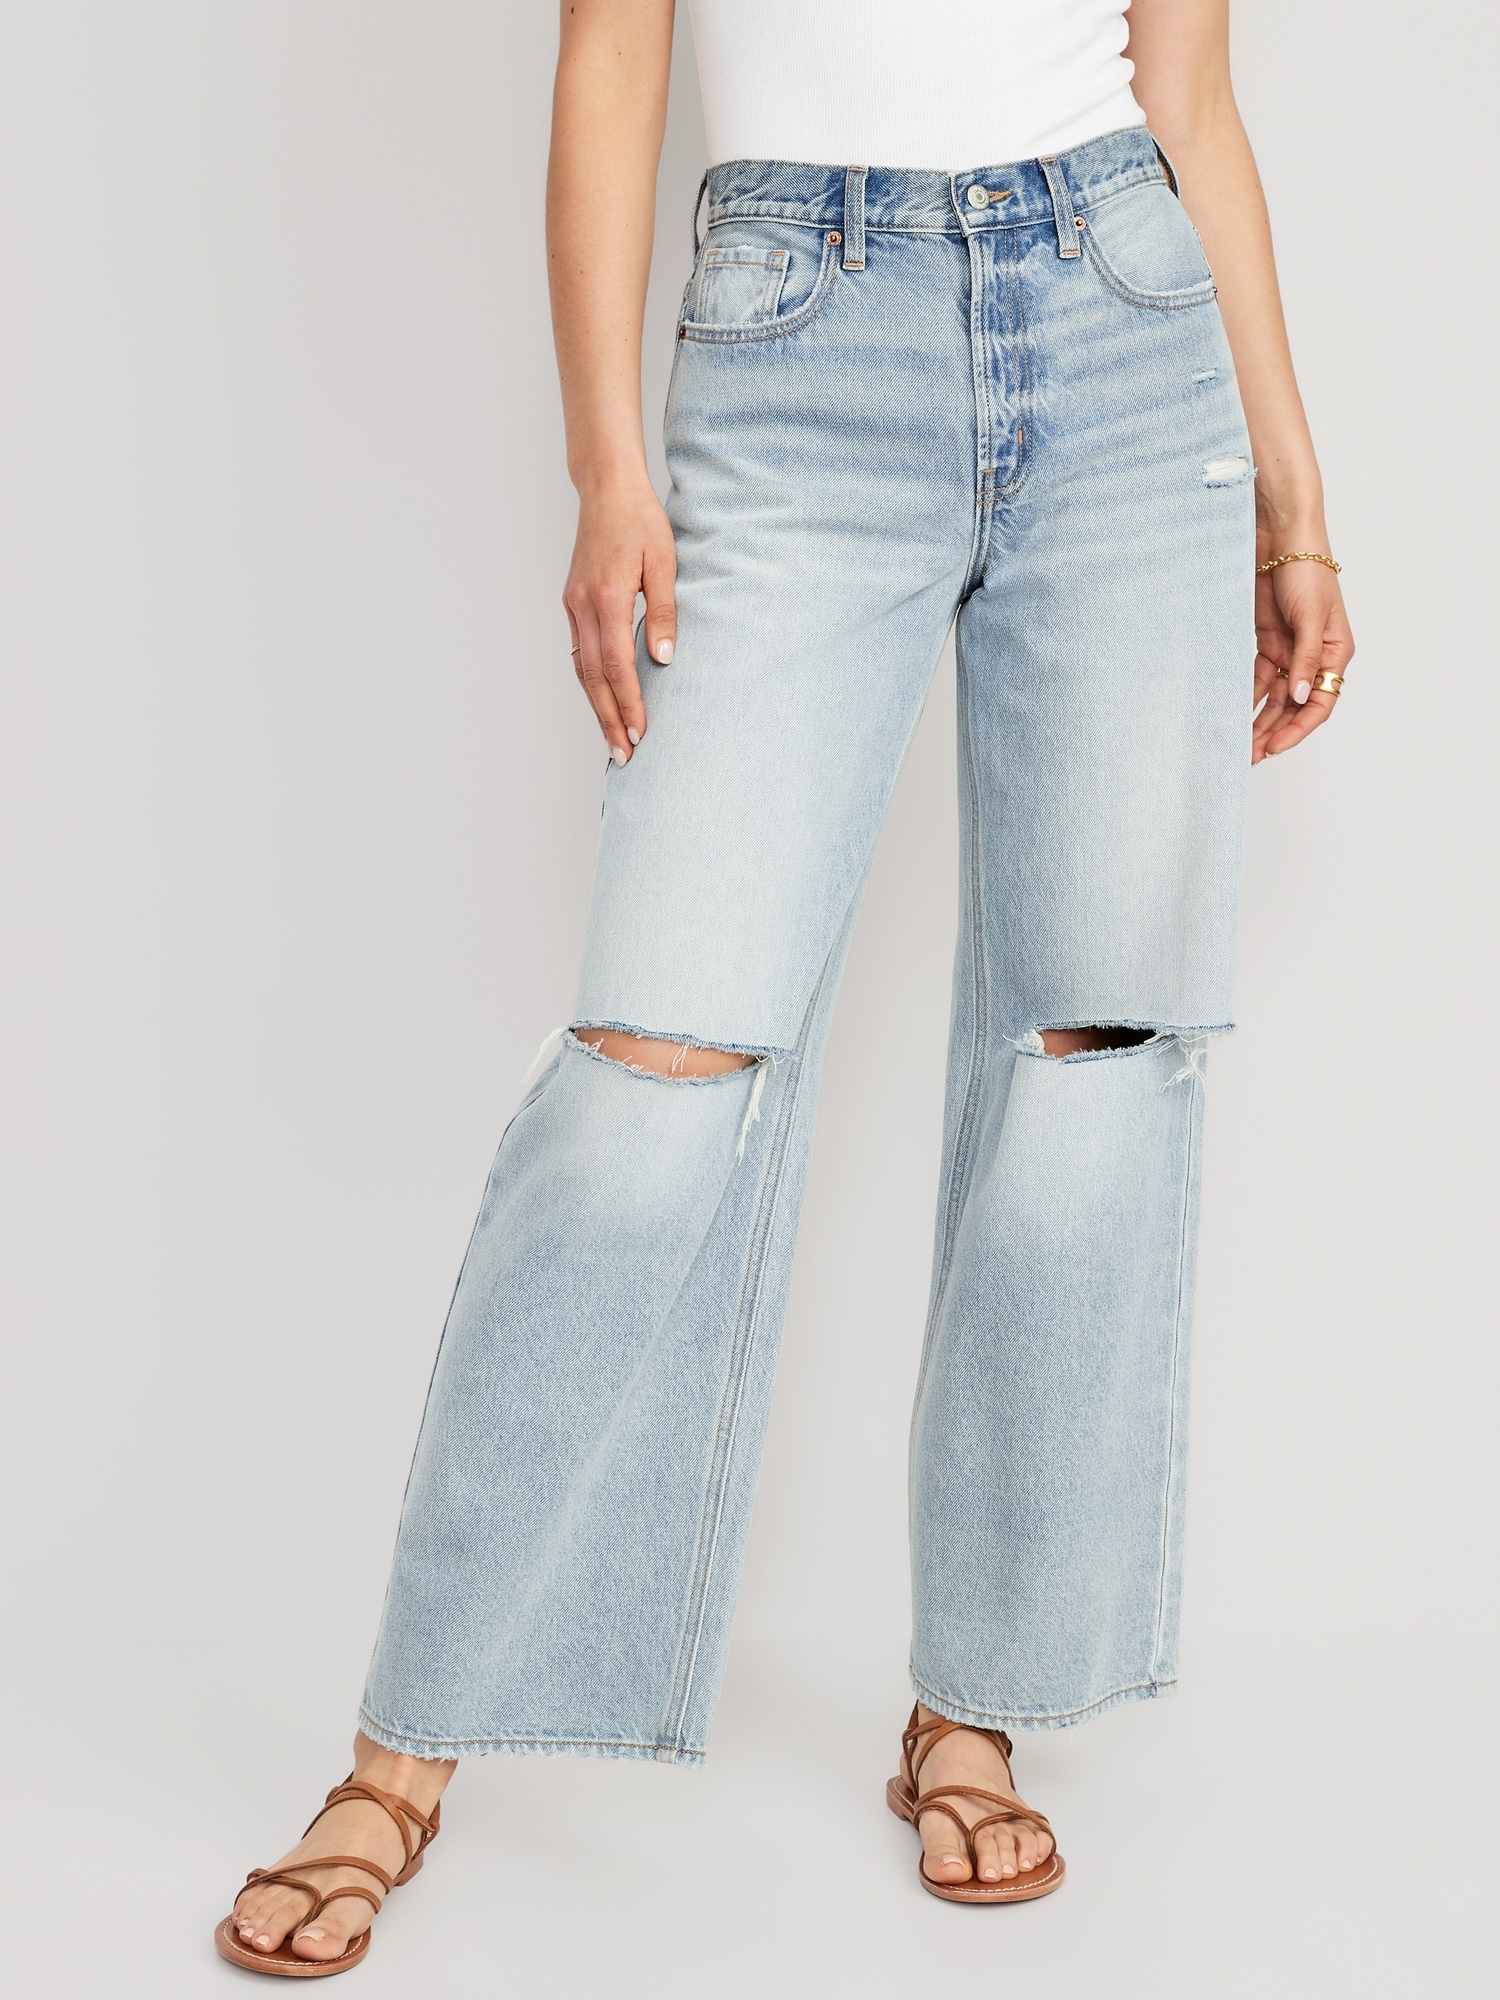 Retro Oversized Denim Wide High Jeans With Ripped Holes And Distressed  Design For Women Big Loose Fit Joggers With Bottom Style 0138 From Xx2015,  $29.19